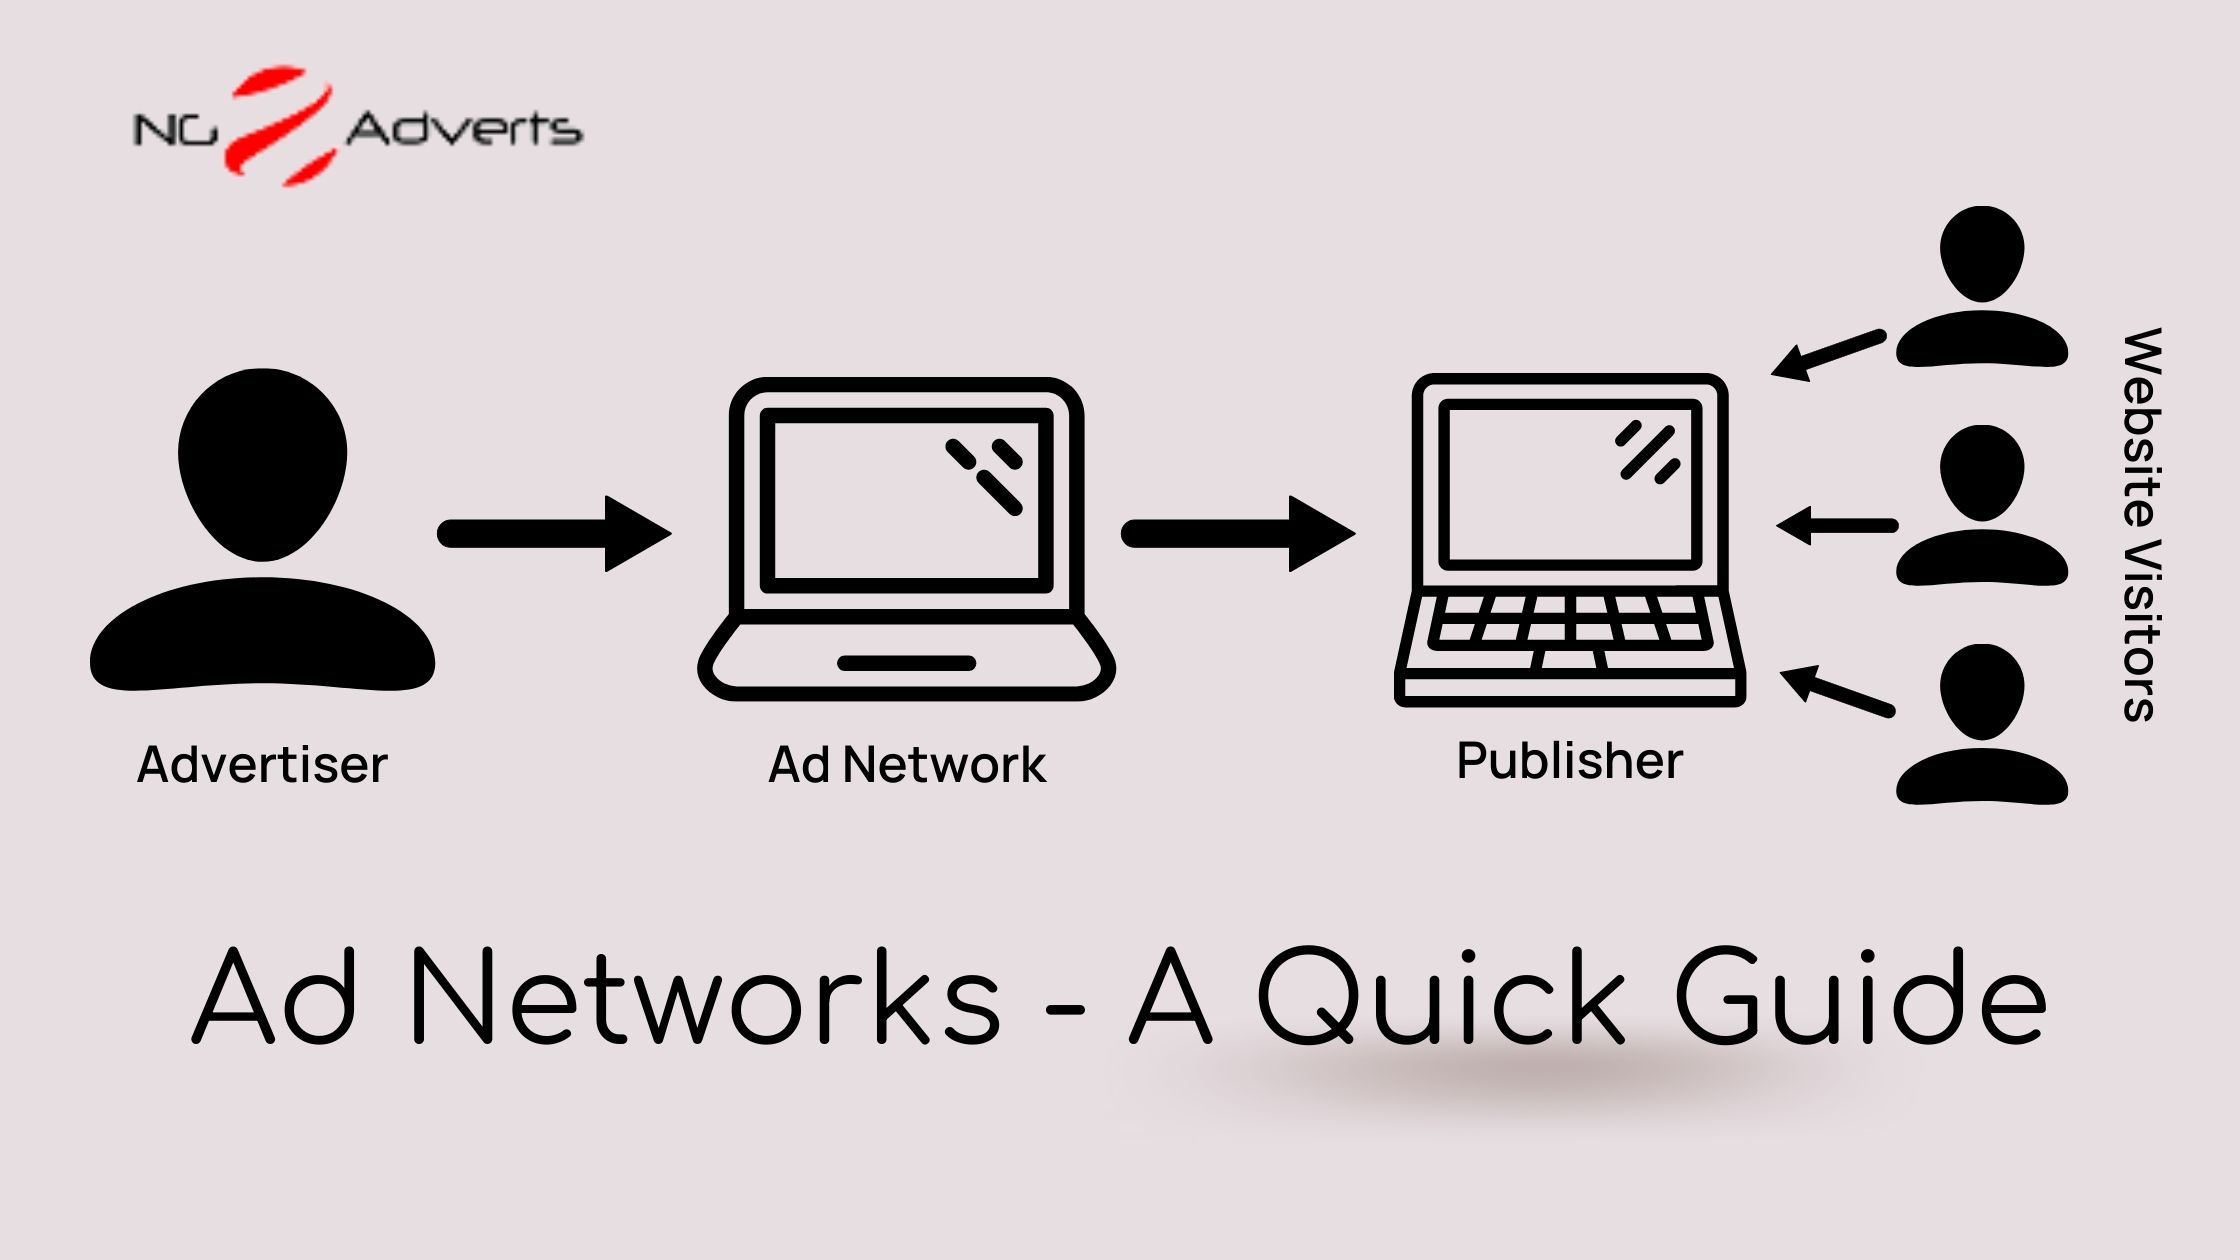 Ad Networks - A Quick Guide